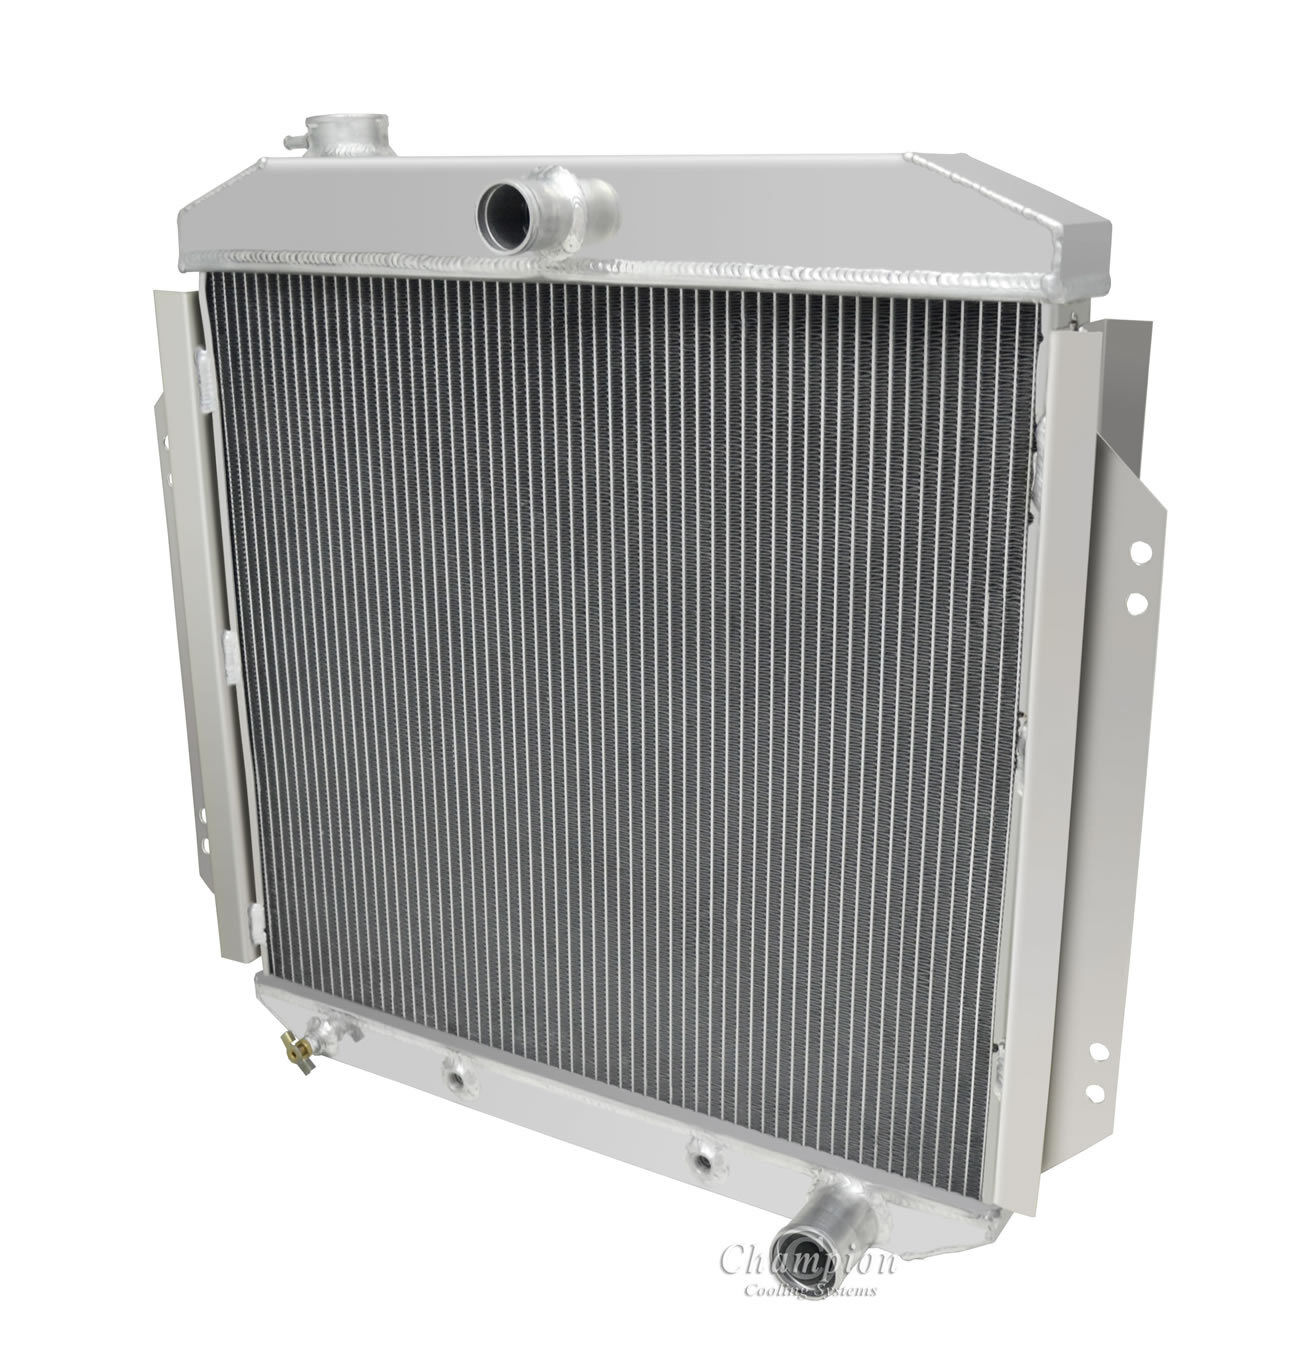 Champion 3 Row DR Aluminum Radiator For 1957-60 Ford Truck Chevy V8 Config 